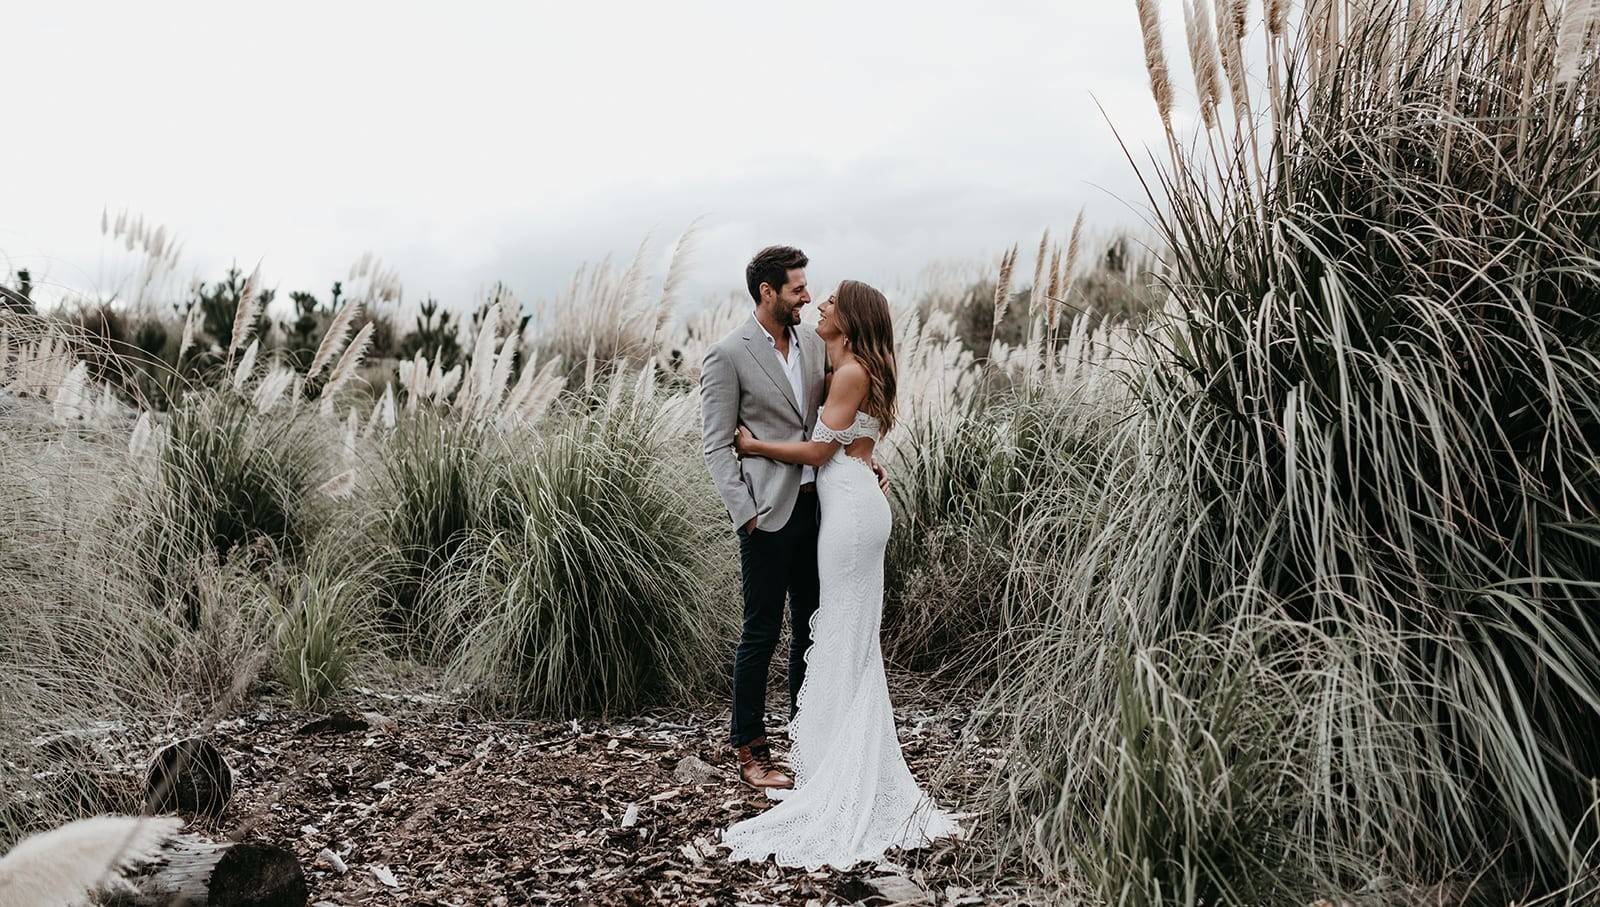 Bride and groom hugging in a grass field